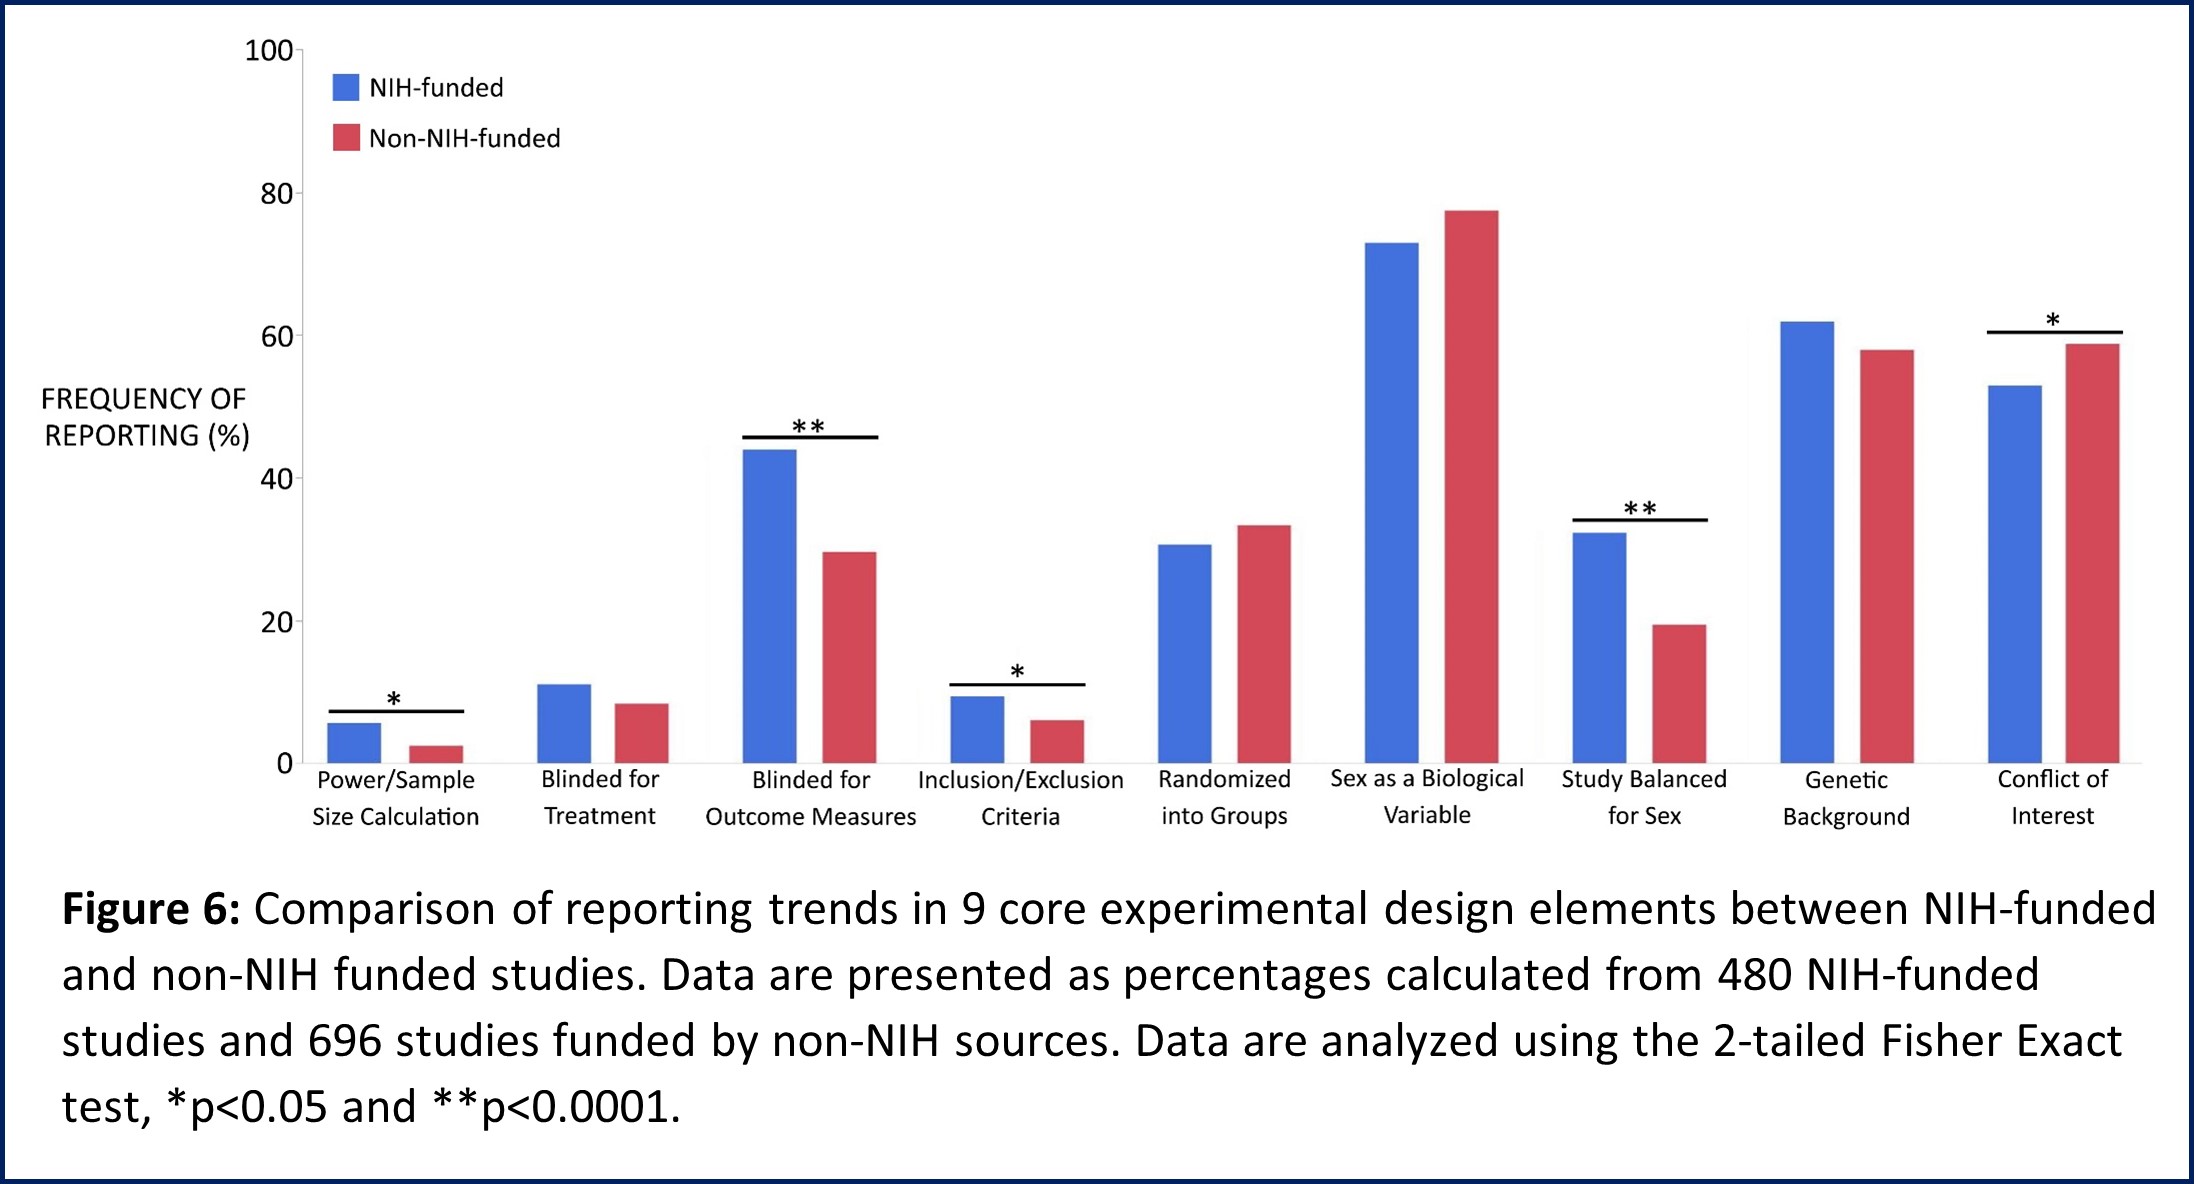 Graph shows reporting of 9 core experimental design elements based on funding source